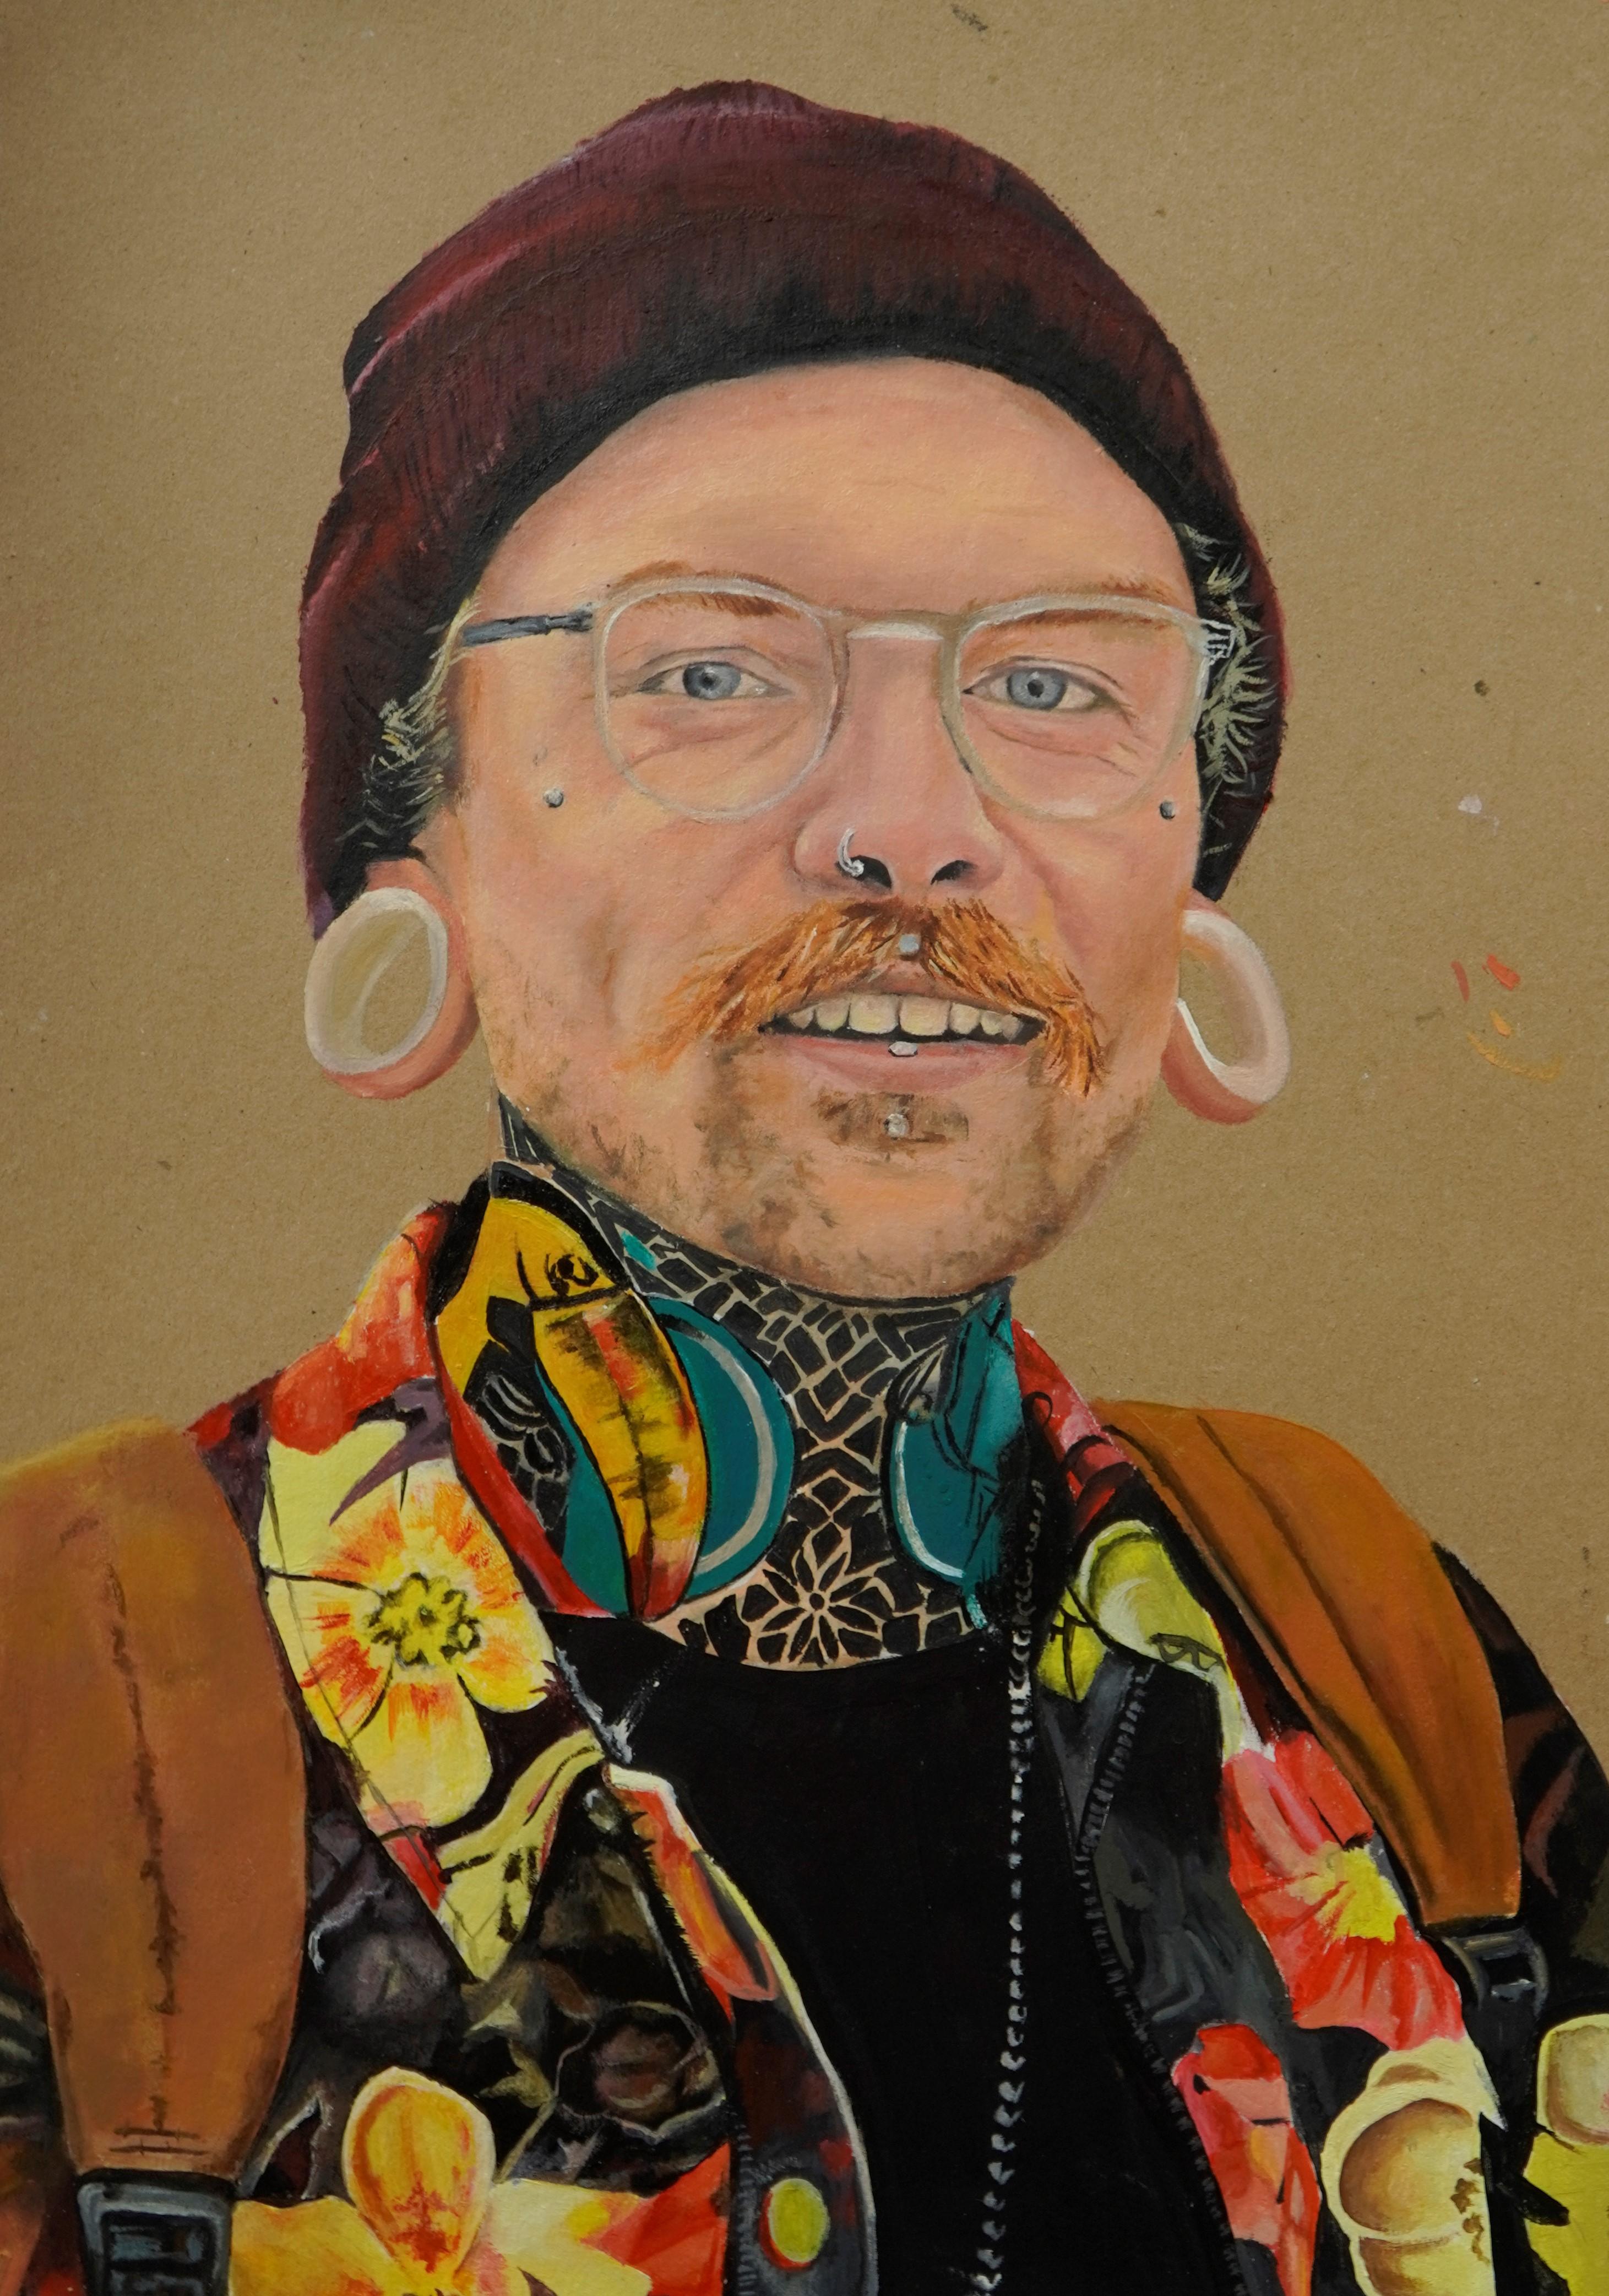 An oil painting of a man with vibrant clothing, flesh tunnels and piercings, smiling. 